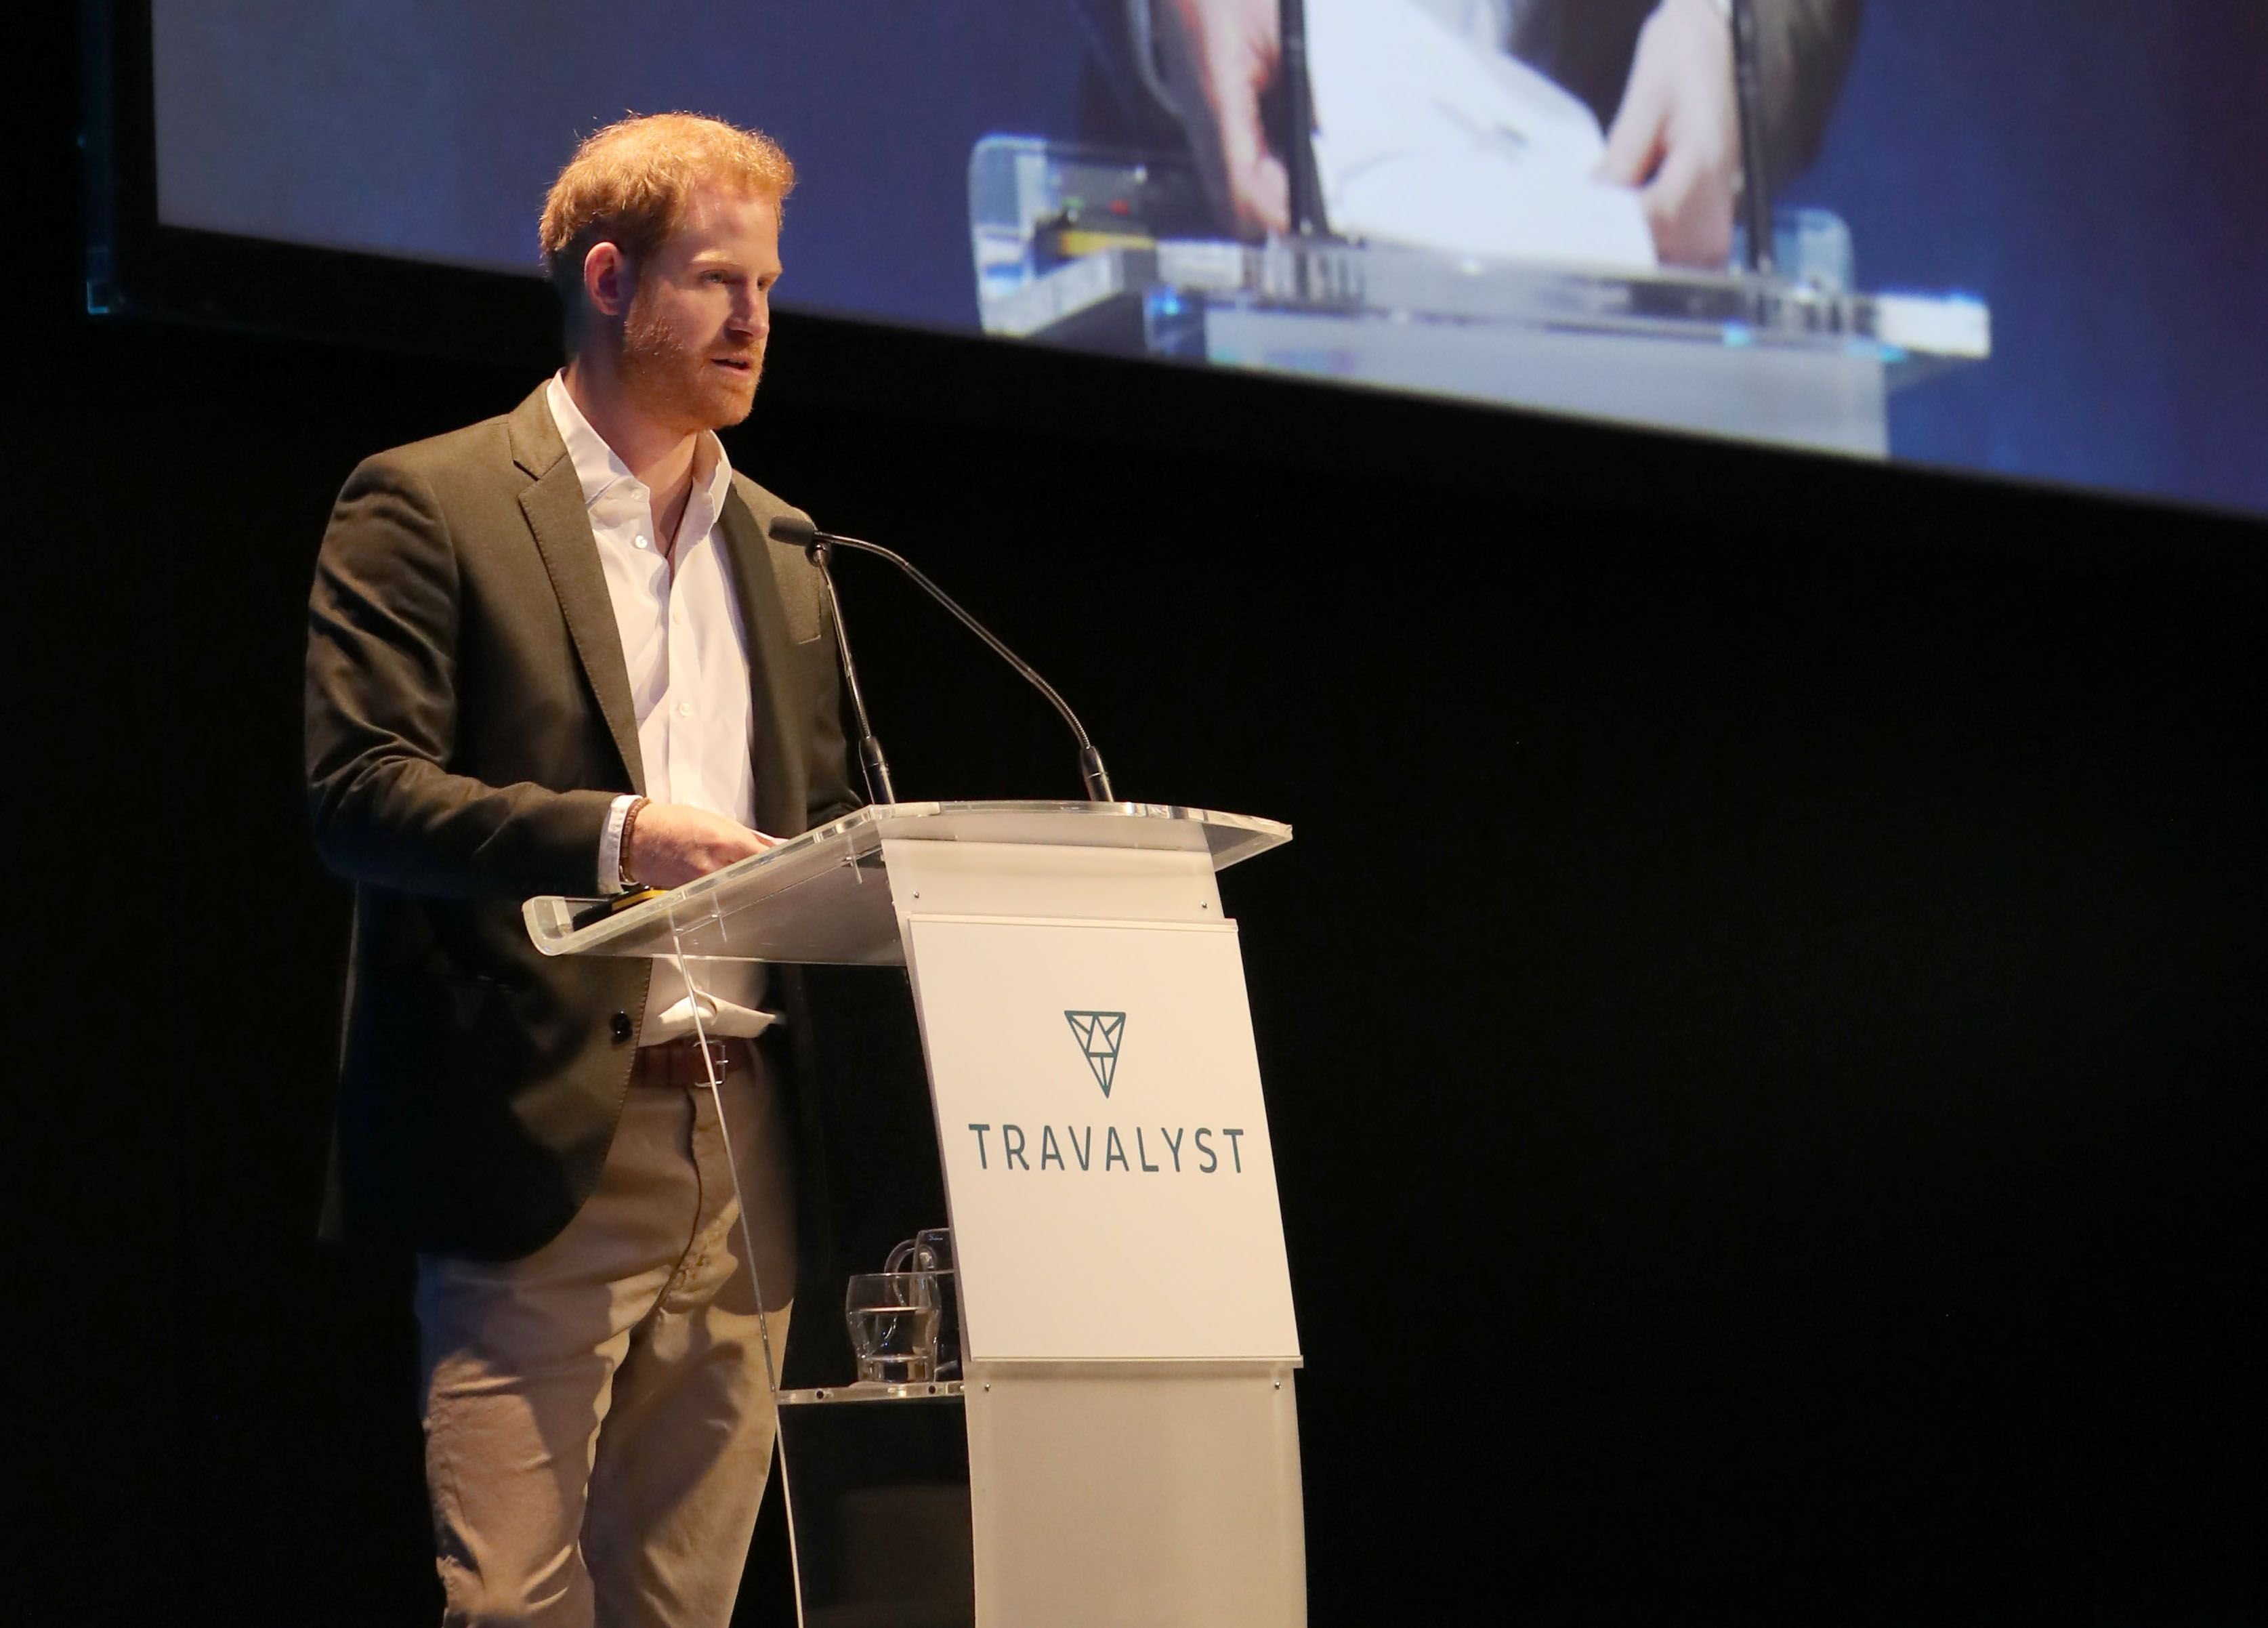 Prince Harry at the Edinburgh International Conference Centre on February 26, 2020 | Photo: Getty Images